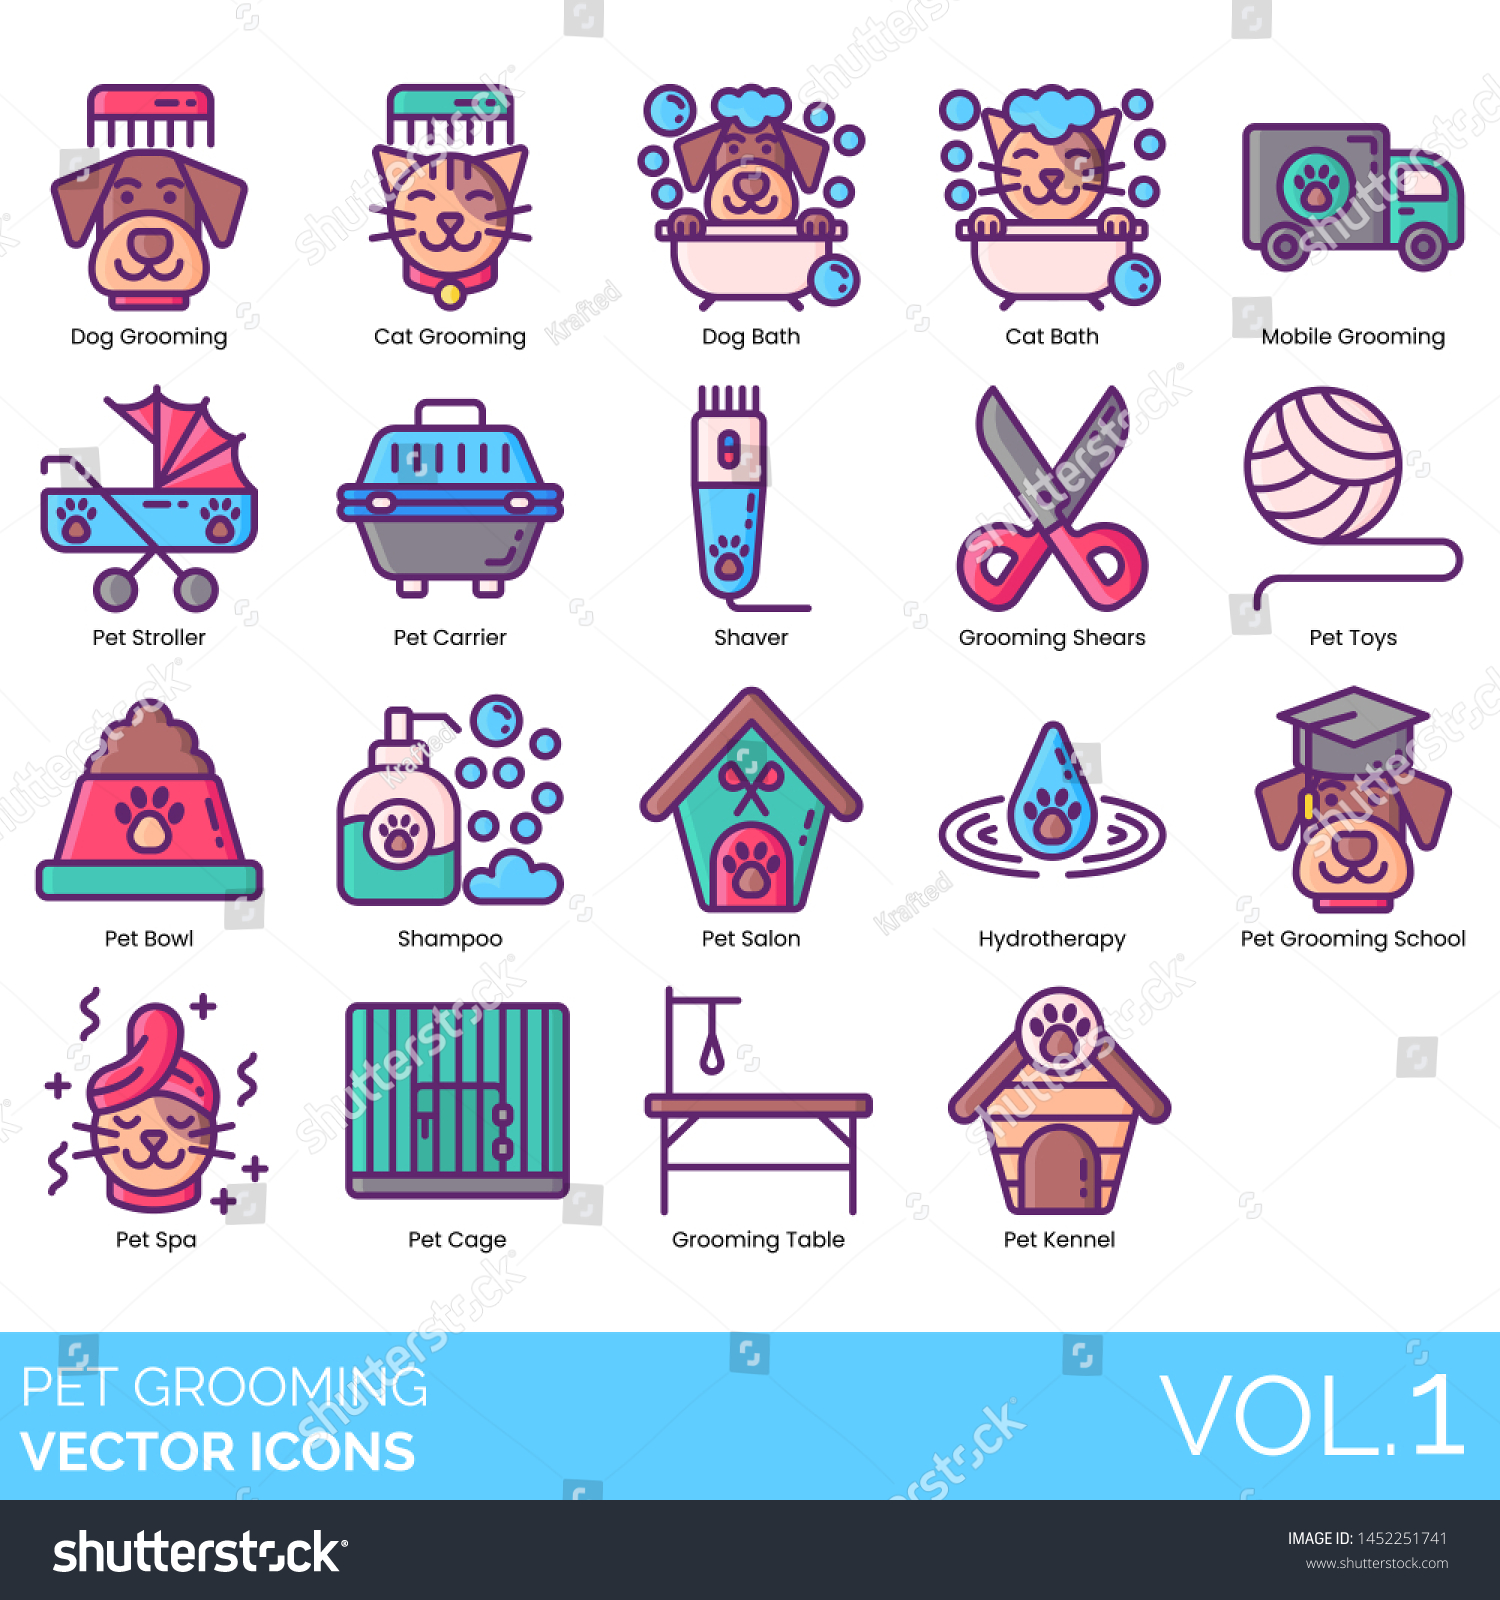 SVG of Pet grooming icons including dog, cat, bath, mobile, stroller, carrier, shaver, shears, toys, bowl, shampoo, salon, hydrotherapy, school, spa, cage, table, kennel. svg